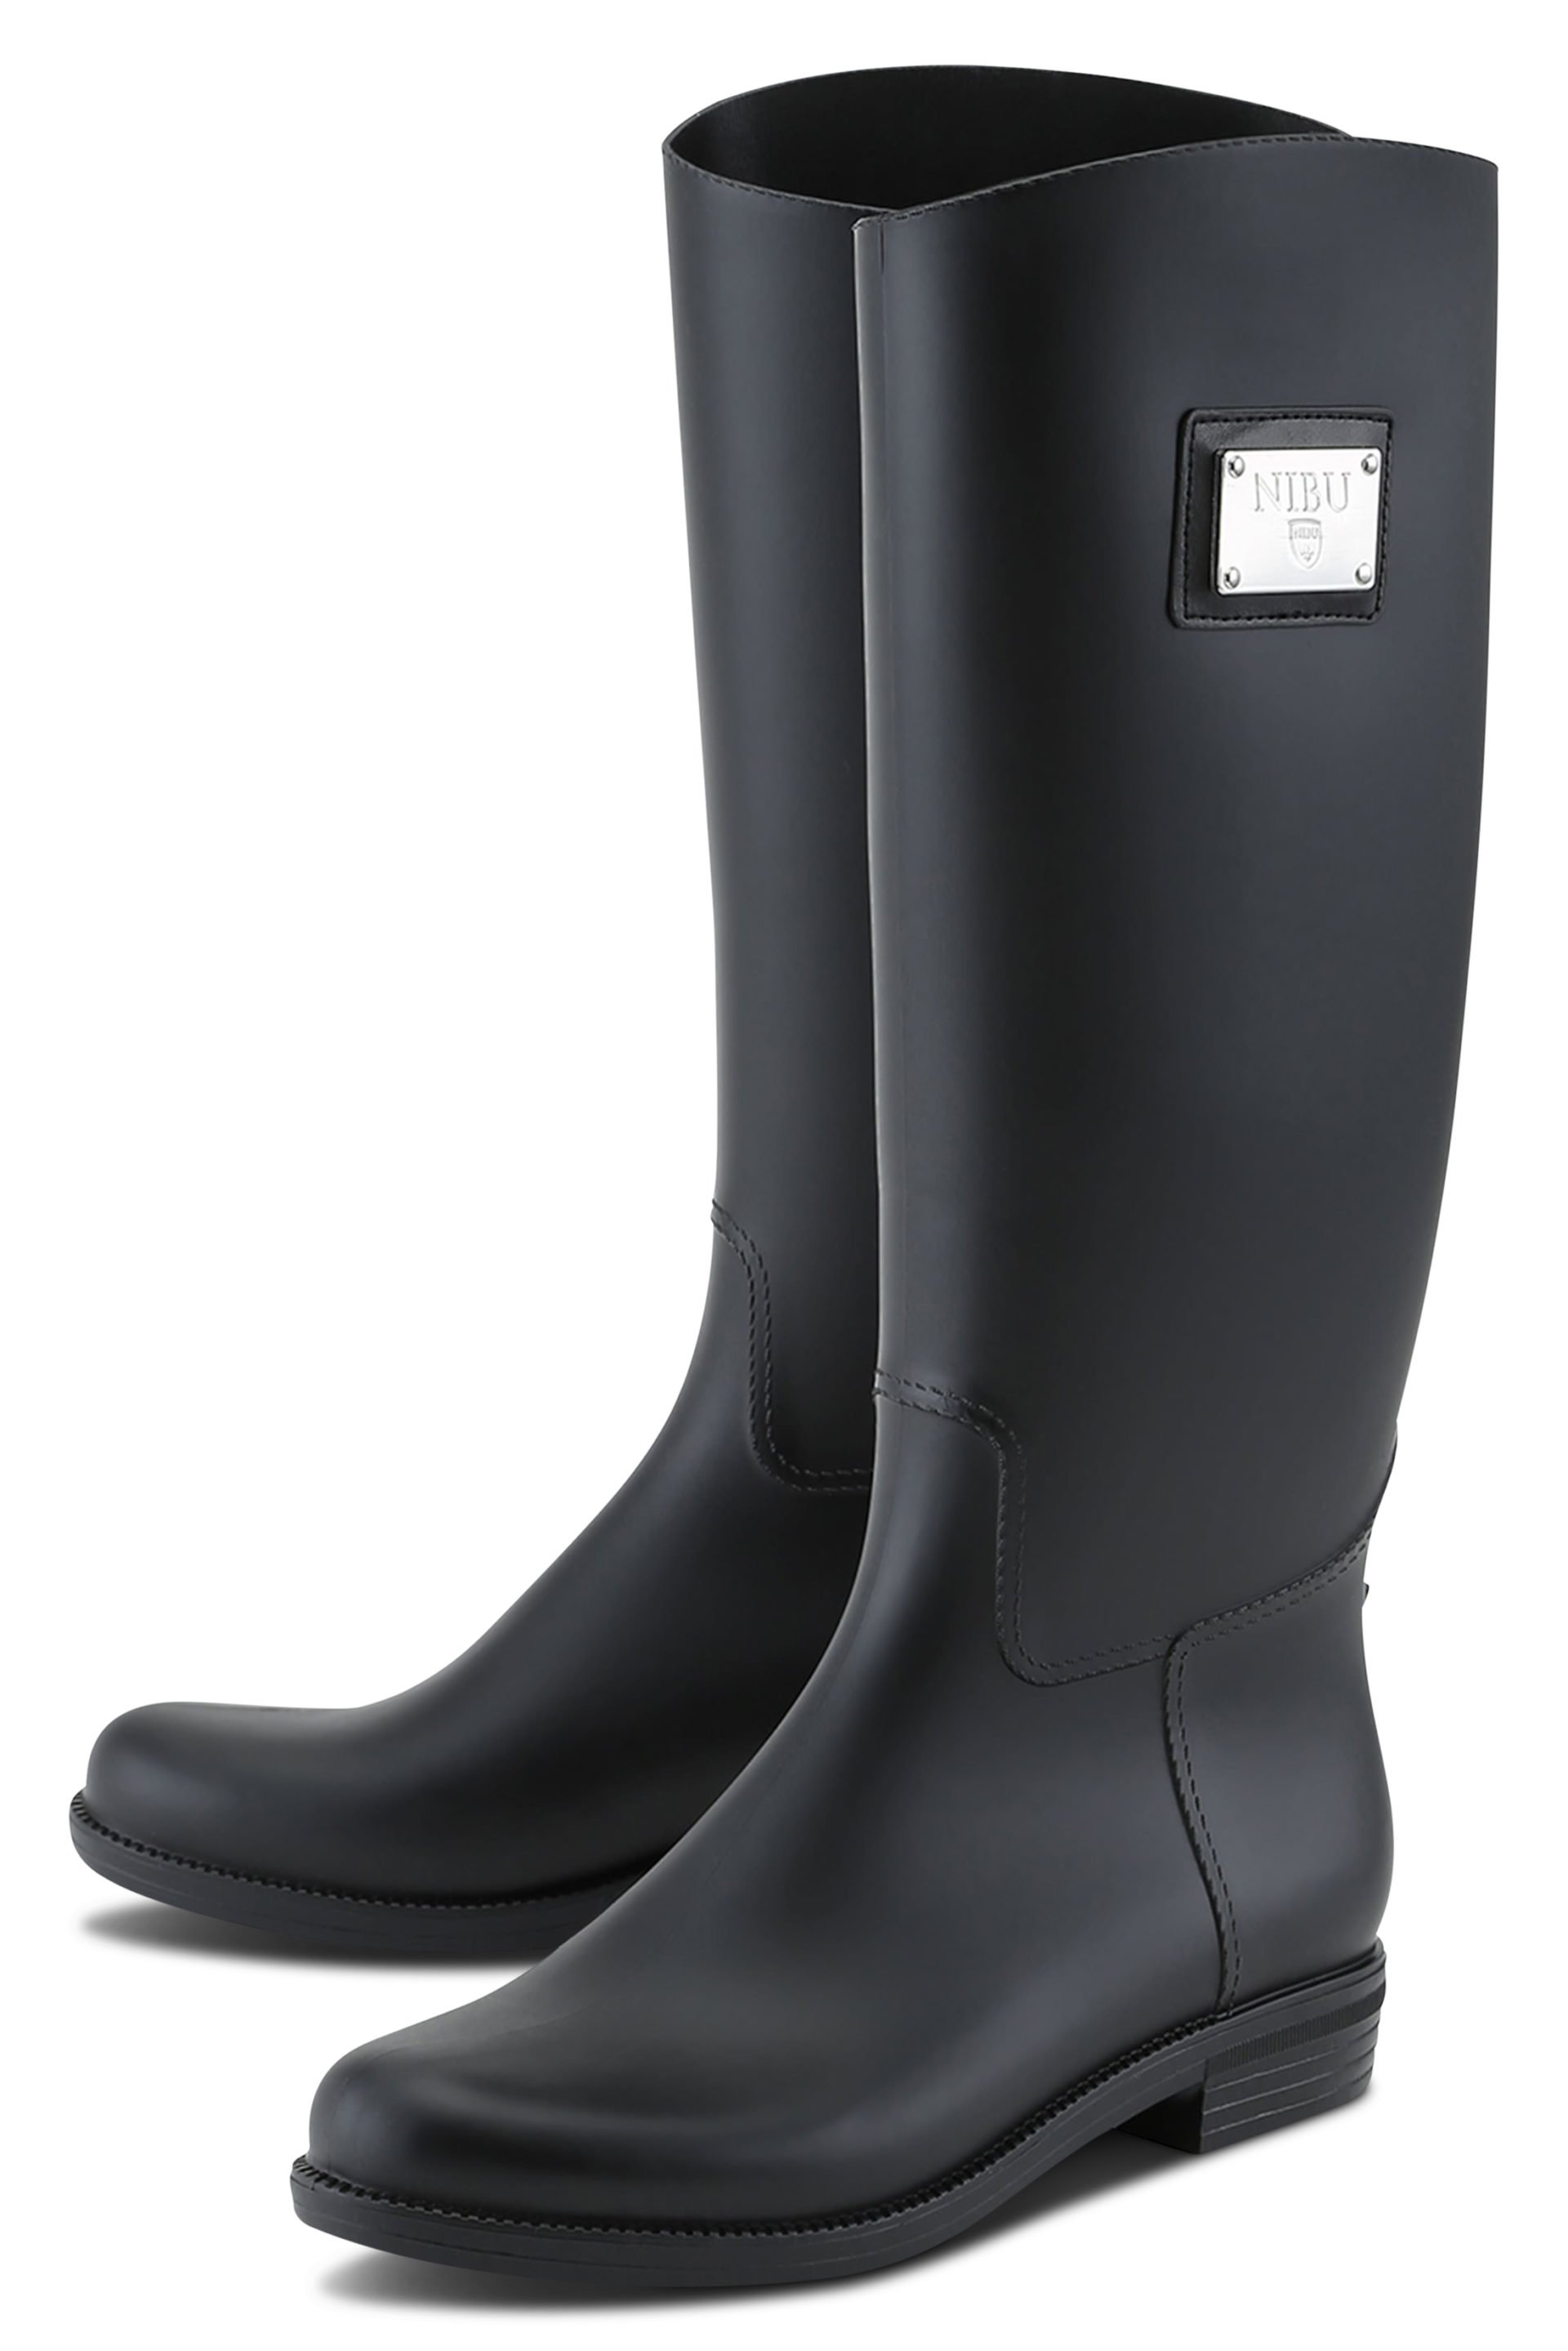 Black rainboots with silver logo plate